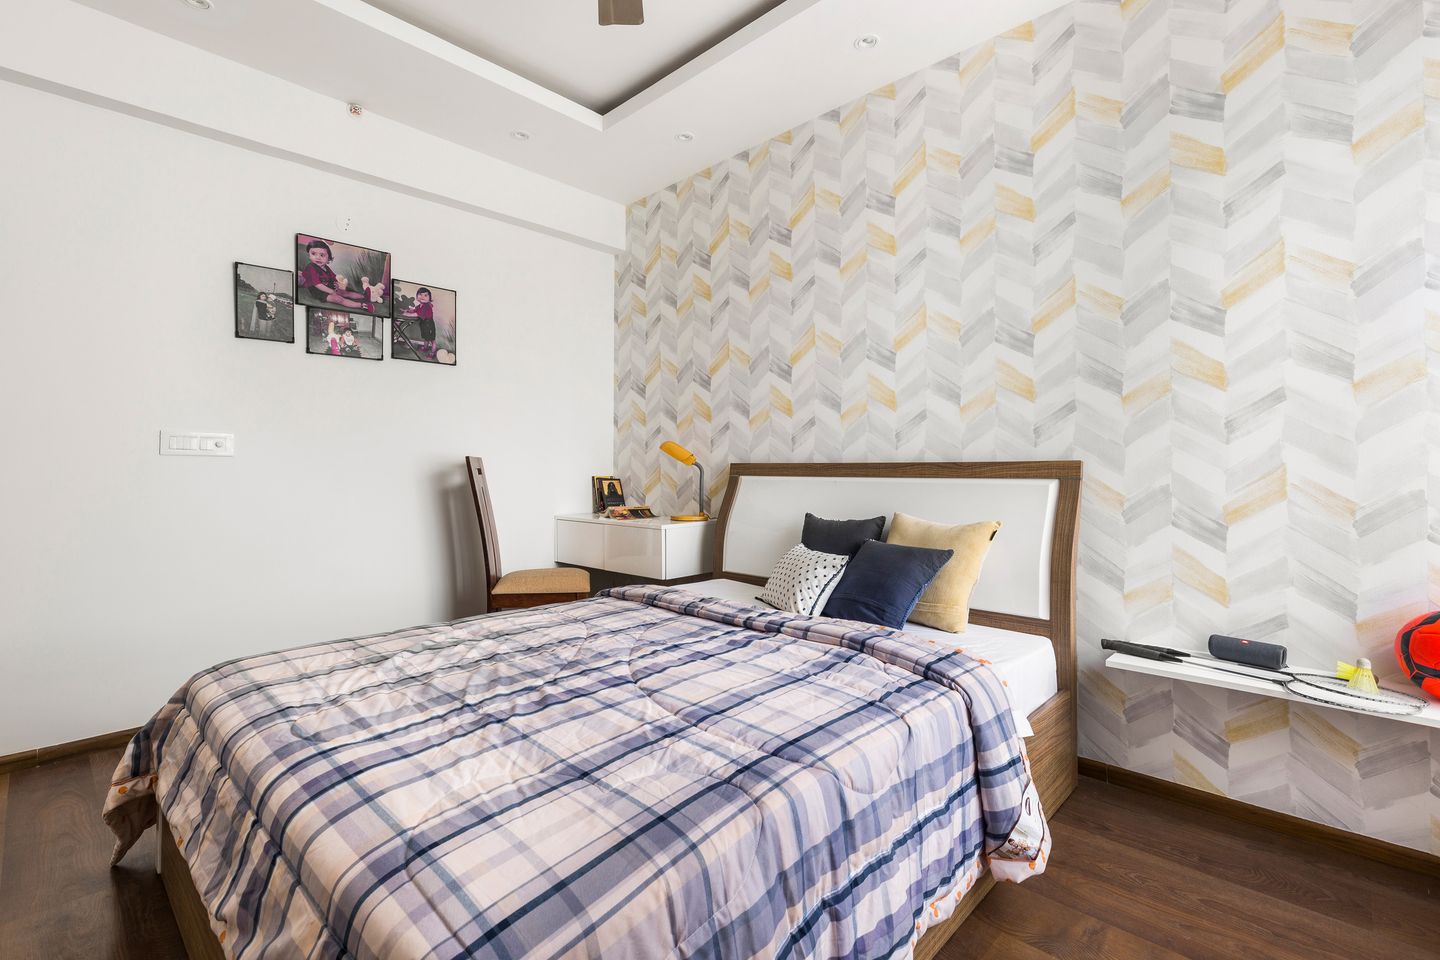 10x8 Ft Guest Room Design With Abstract Geometric Wallpaper - Livspace